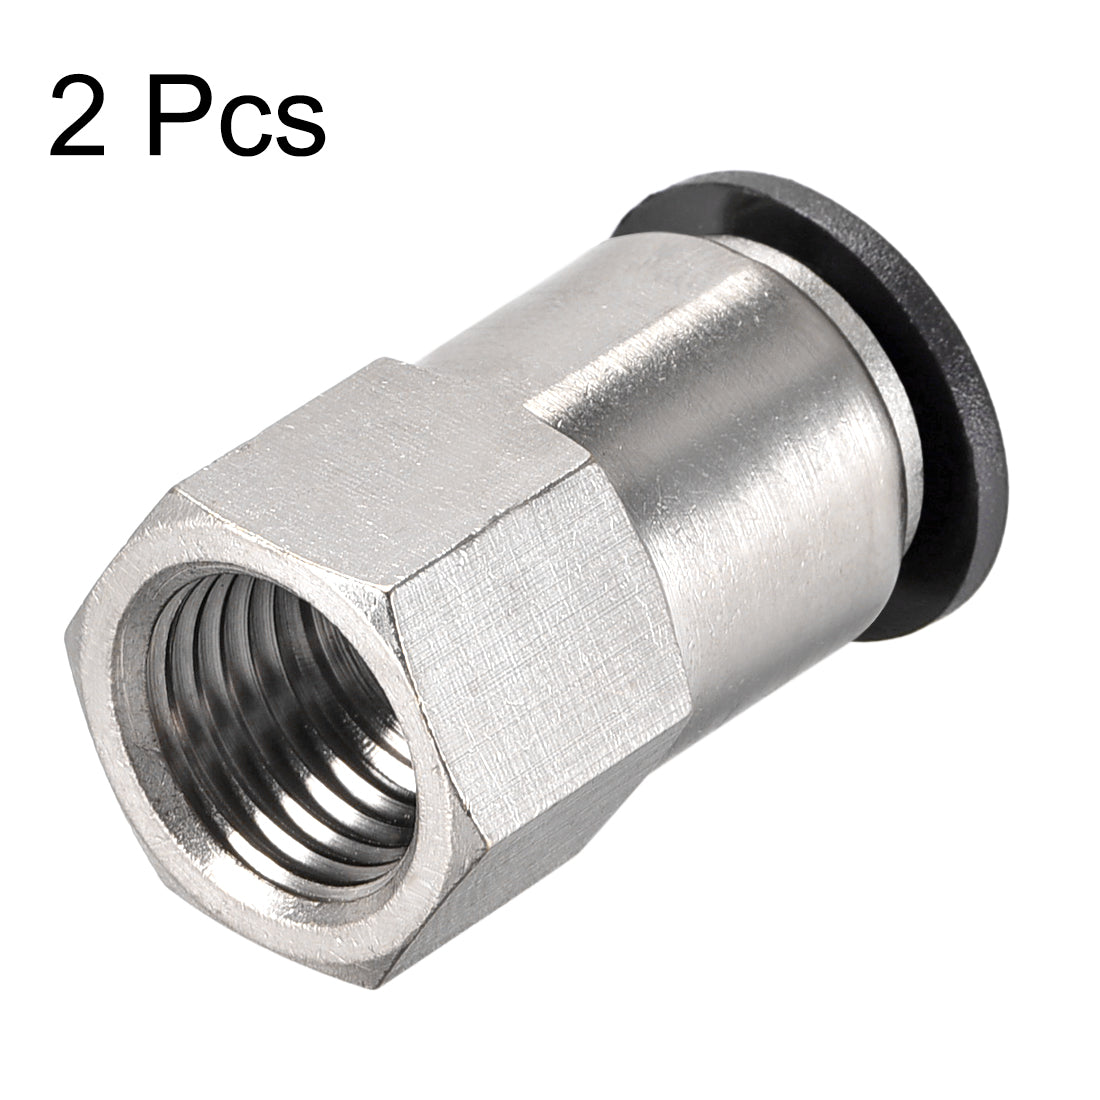 uxcell Uxcell Push to Connect Tube Fitting Adapter 10mm Tube OD x 1/4 BSPT Female Straight Pneumatic Connecter Pipe Fitting 2pcs